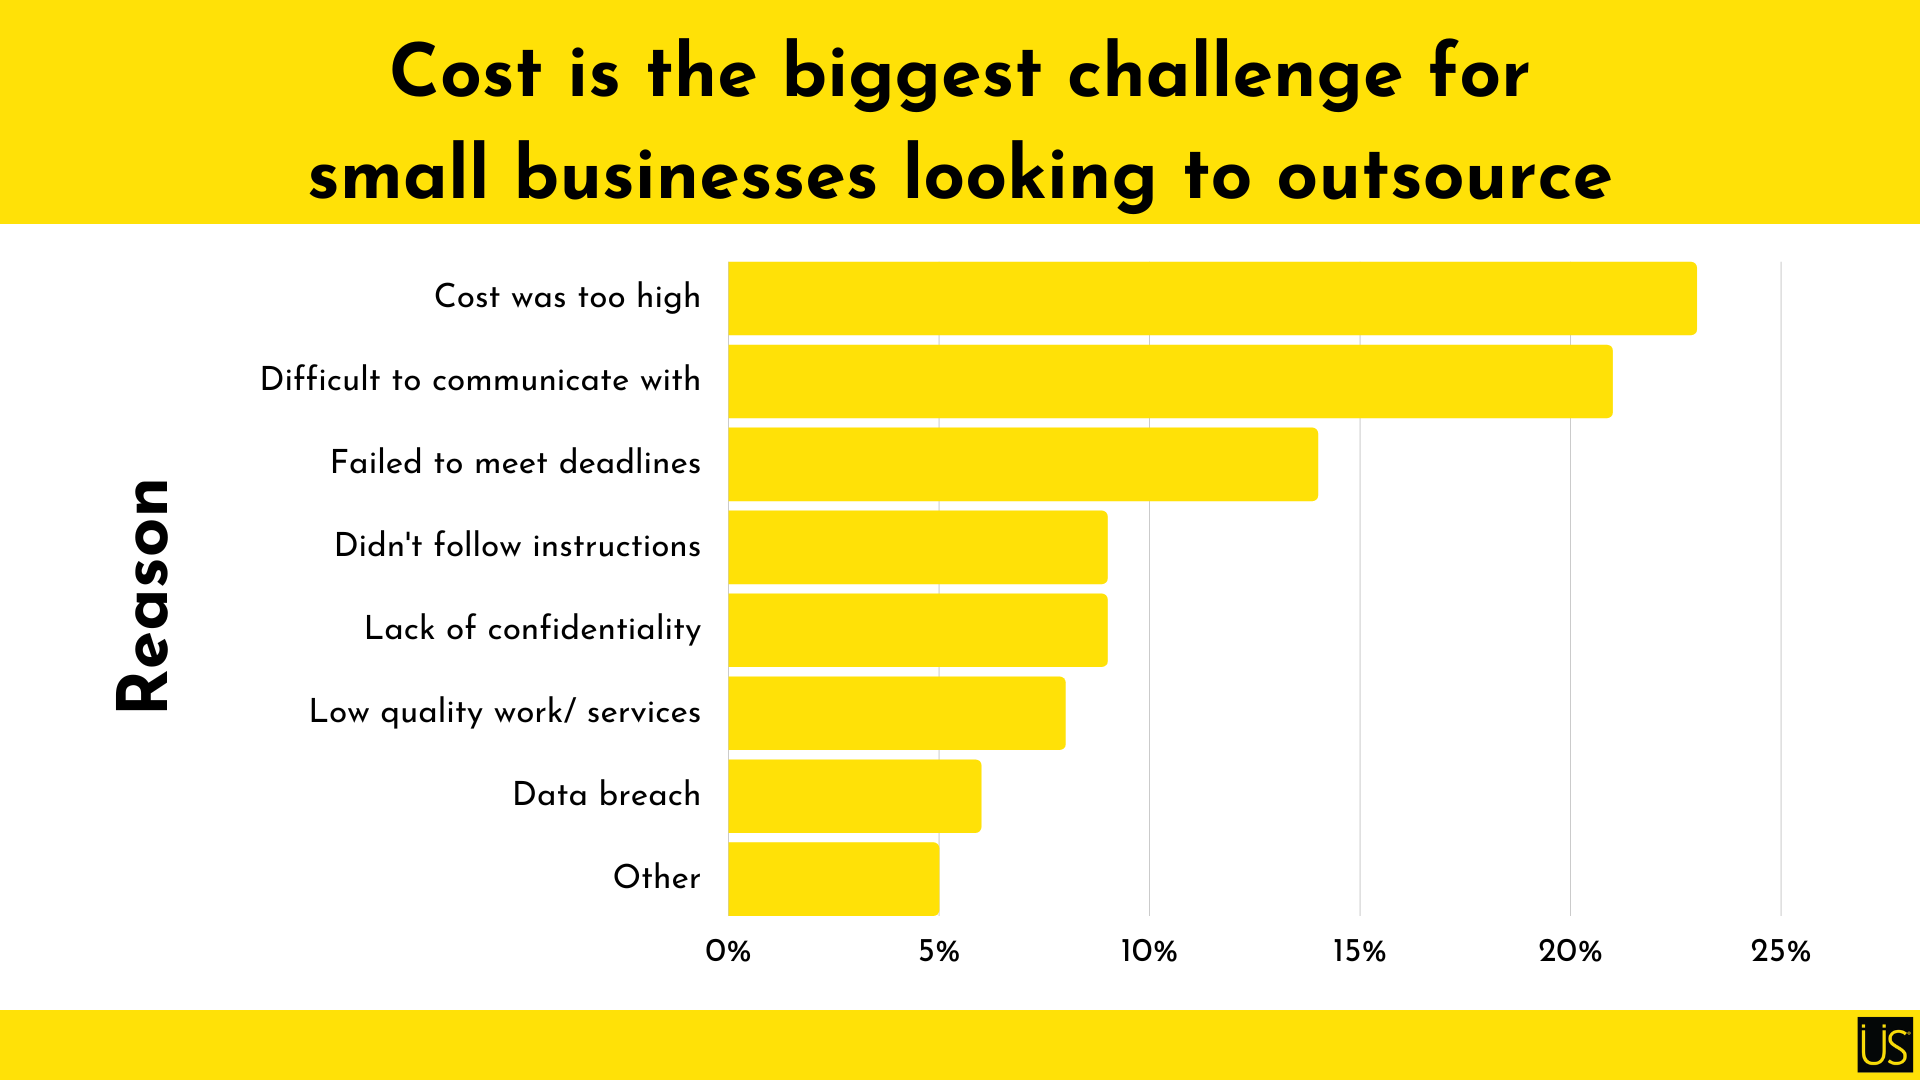 Cost is the biggest challenge for businesses looking to outsource